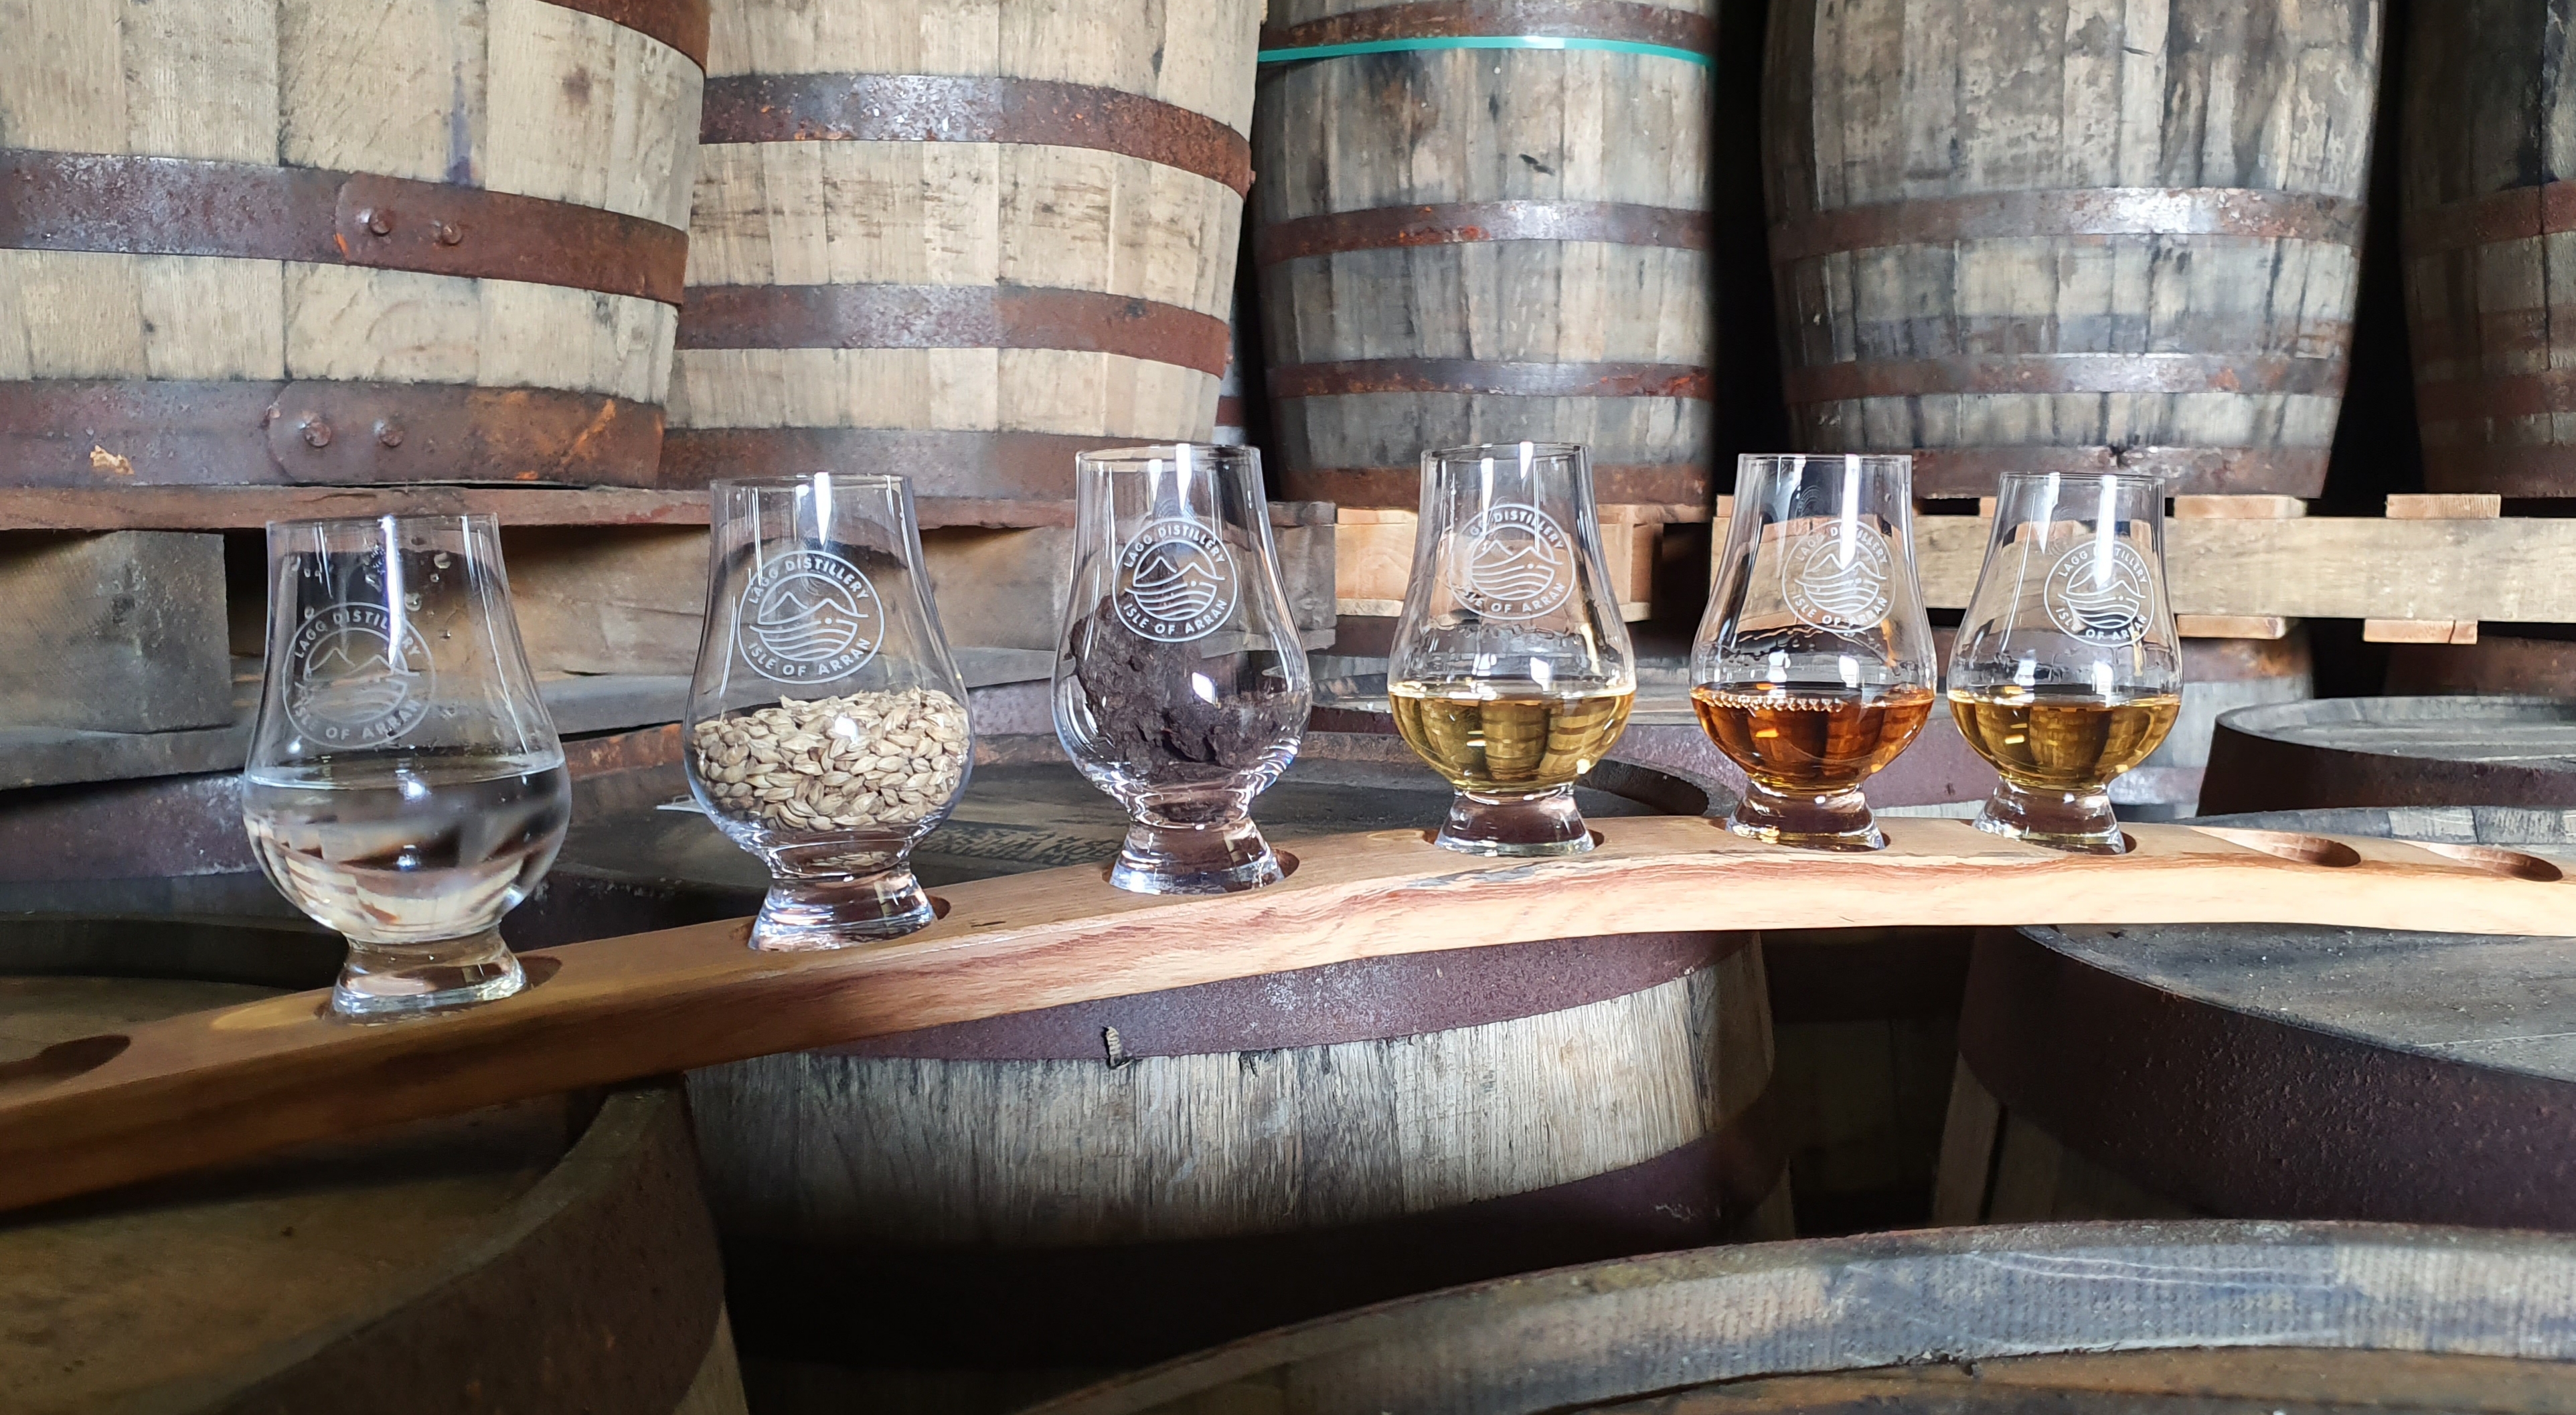 Three Releases on Barrel Stave